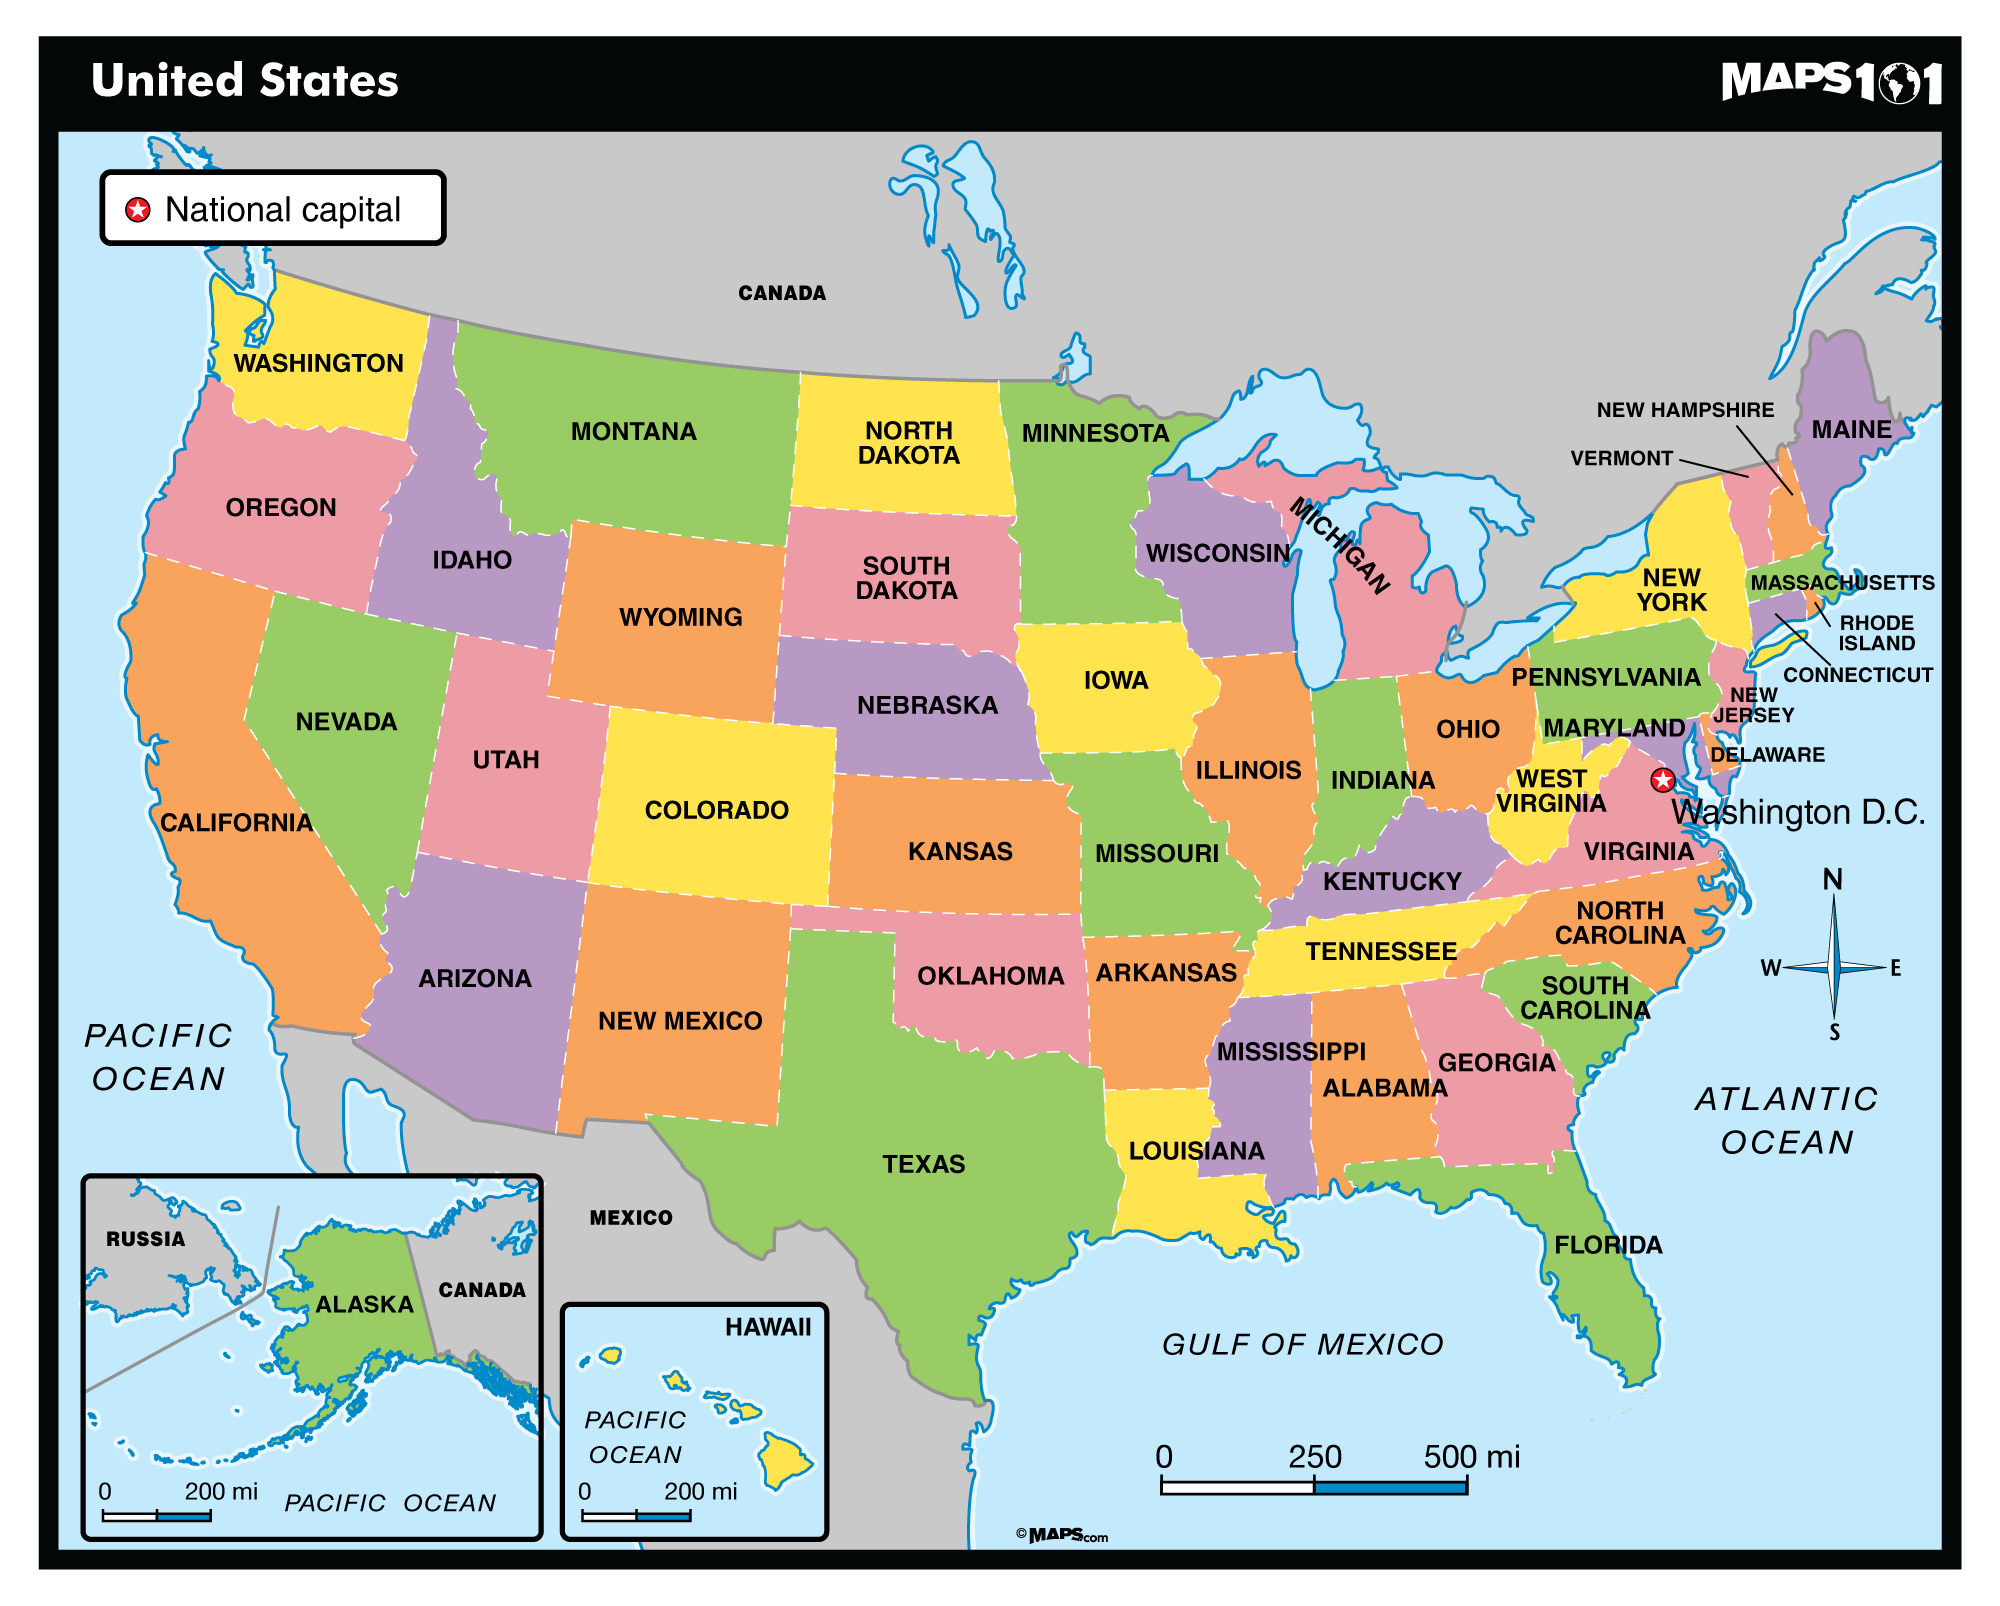 United States Of America Political Map Rezfoods Resep Masakan Indonesia